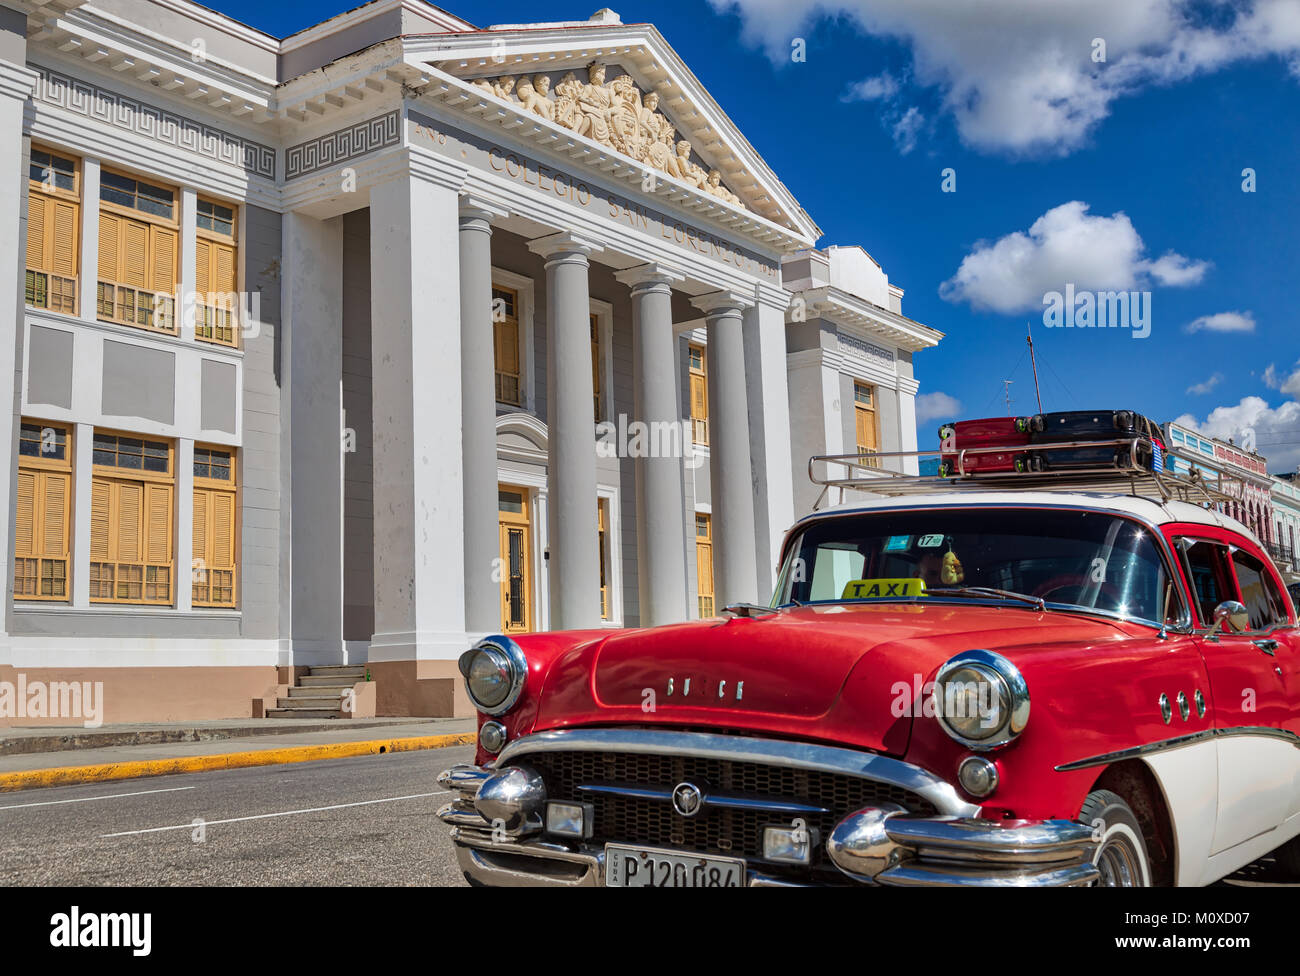 Red Car in front of san lorenzo college cienfuegos Stock Photo